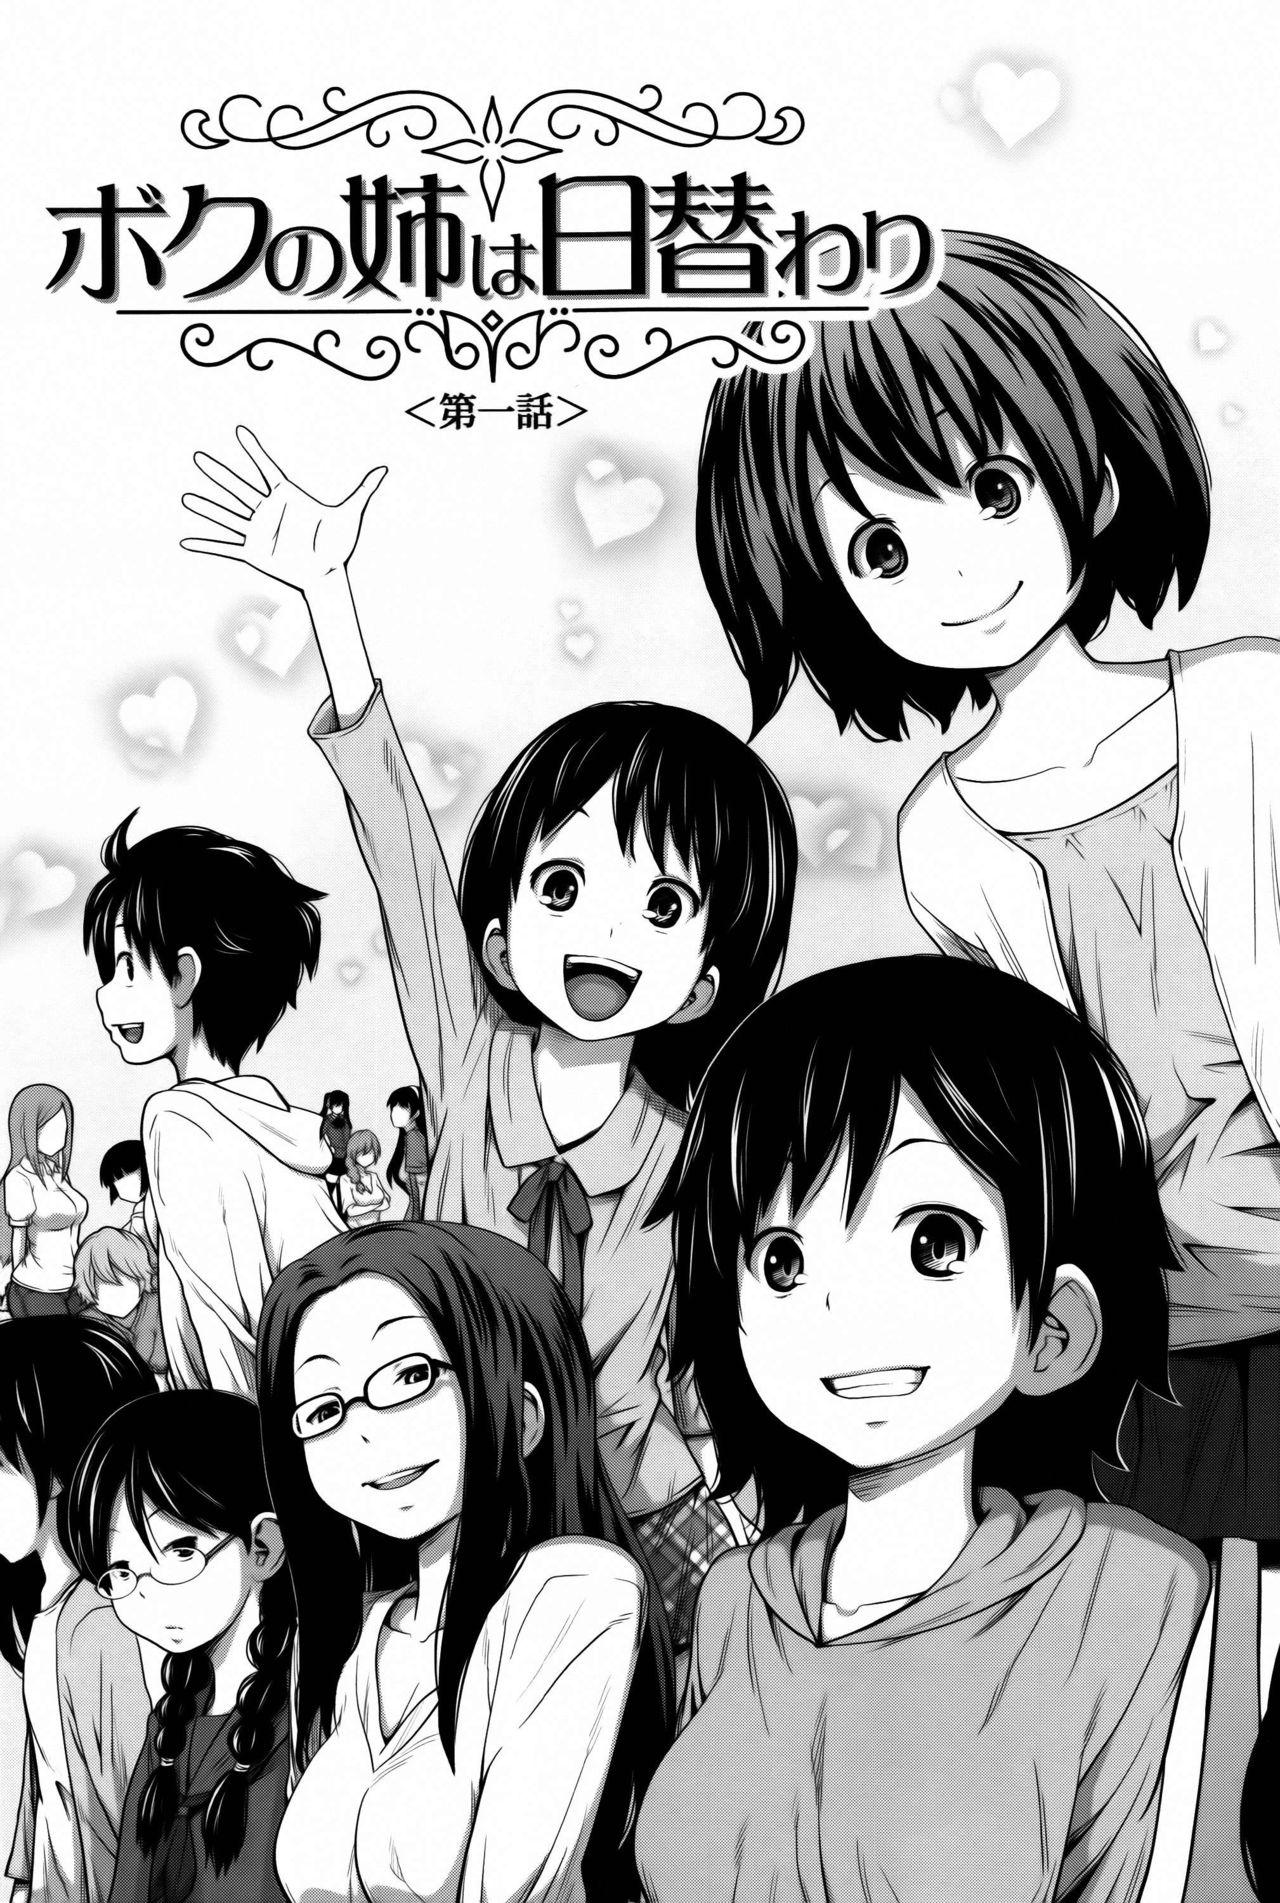 Daily Sisters Ch. 1 8